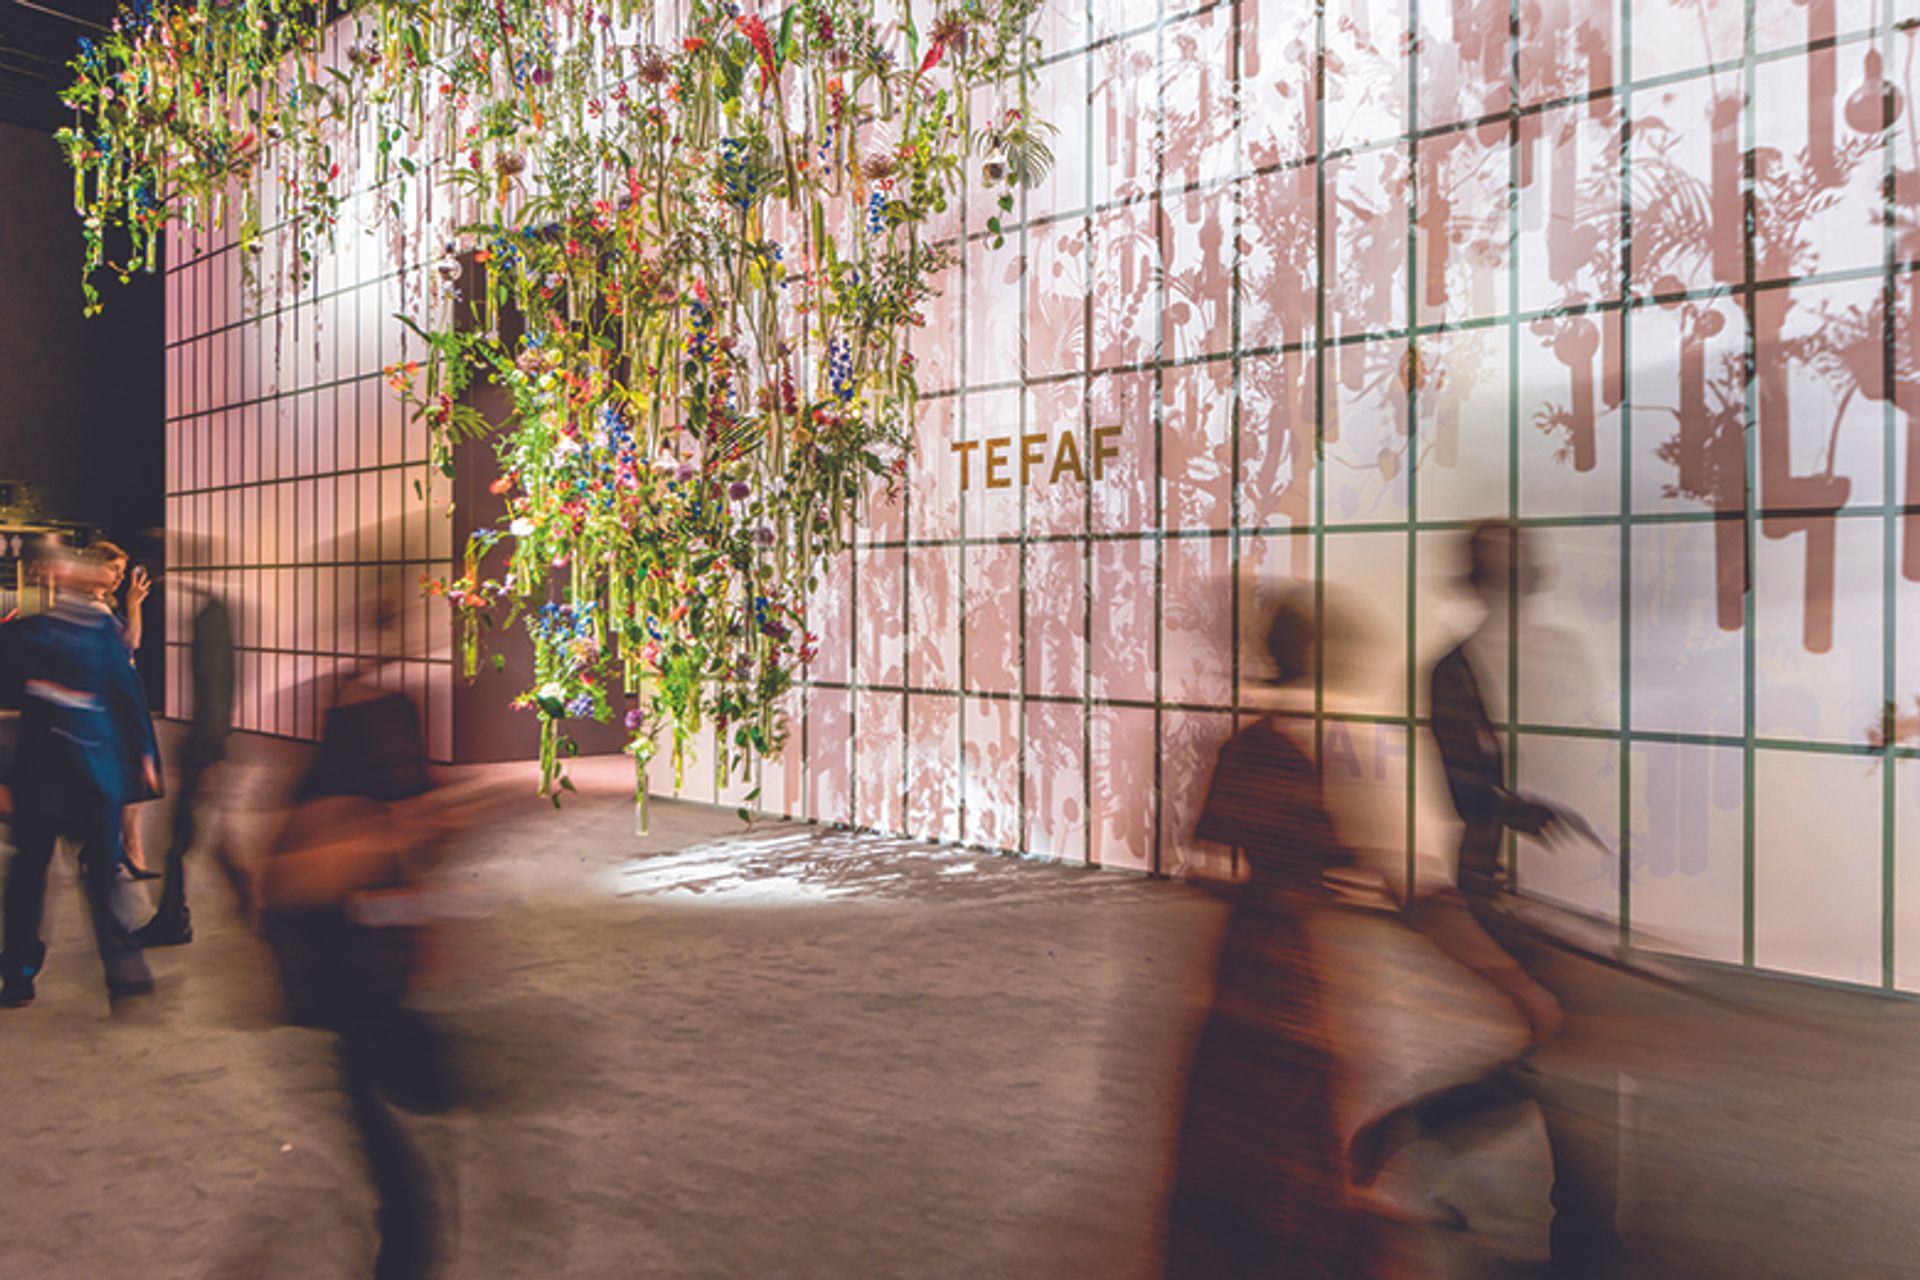 Leading light: Tefaf is hoping to cement its reputation as Europe’s pre-eminent fine art and antiques fair

Photo: Jitske Nap